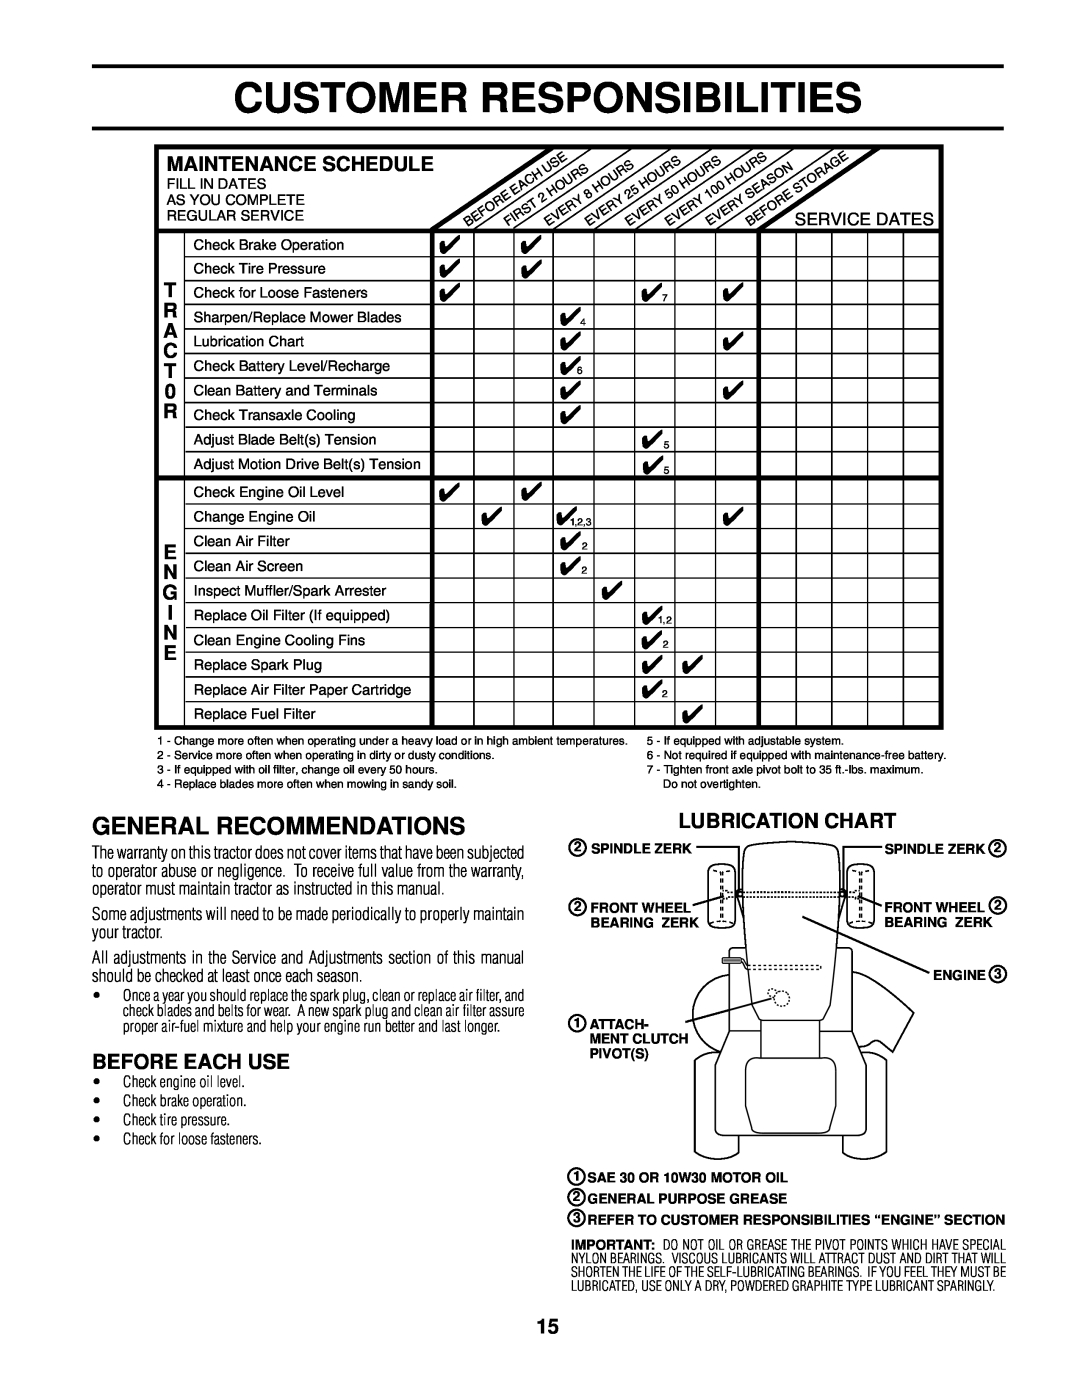 Poulan 161608 Customer Responsibilities, General Recommendations, Before Each Use, Lubrication Chart, Maintenance Schedule 